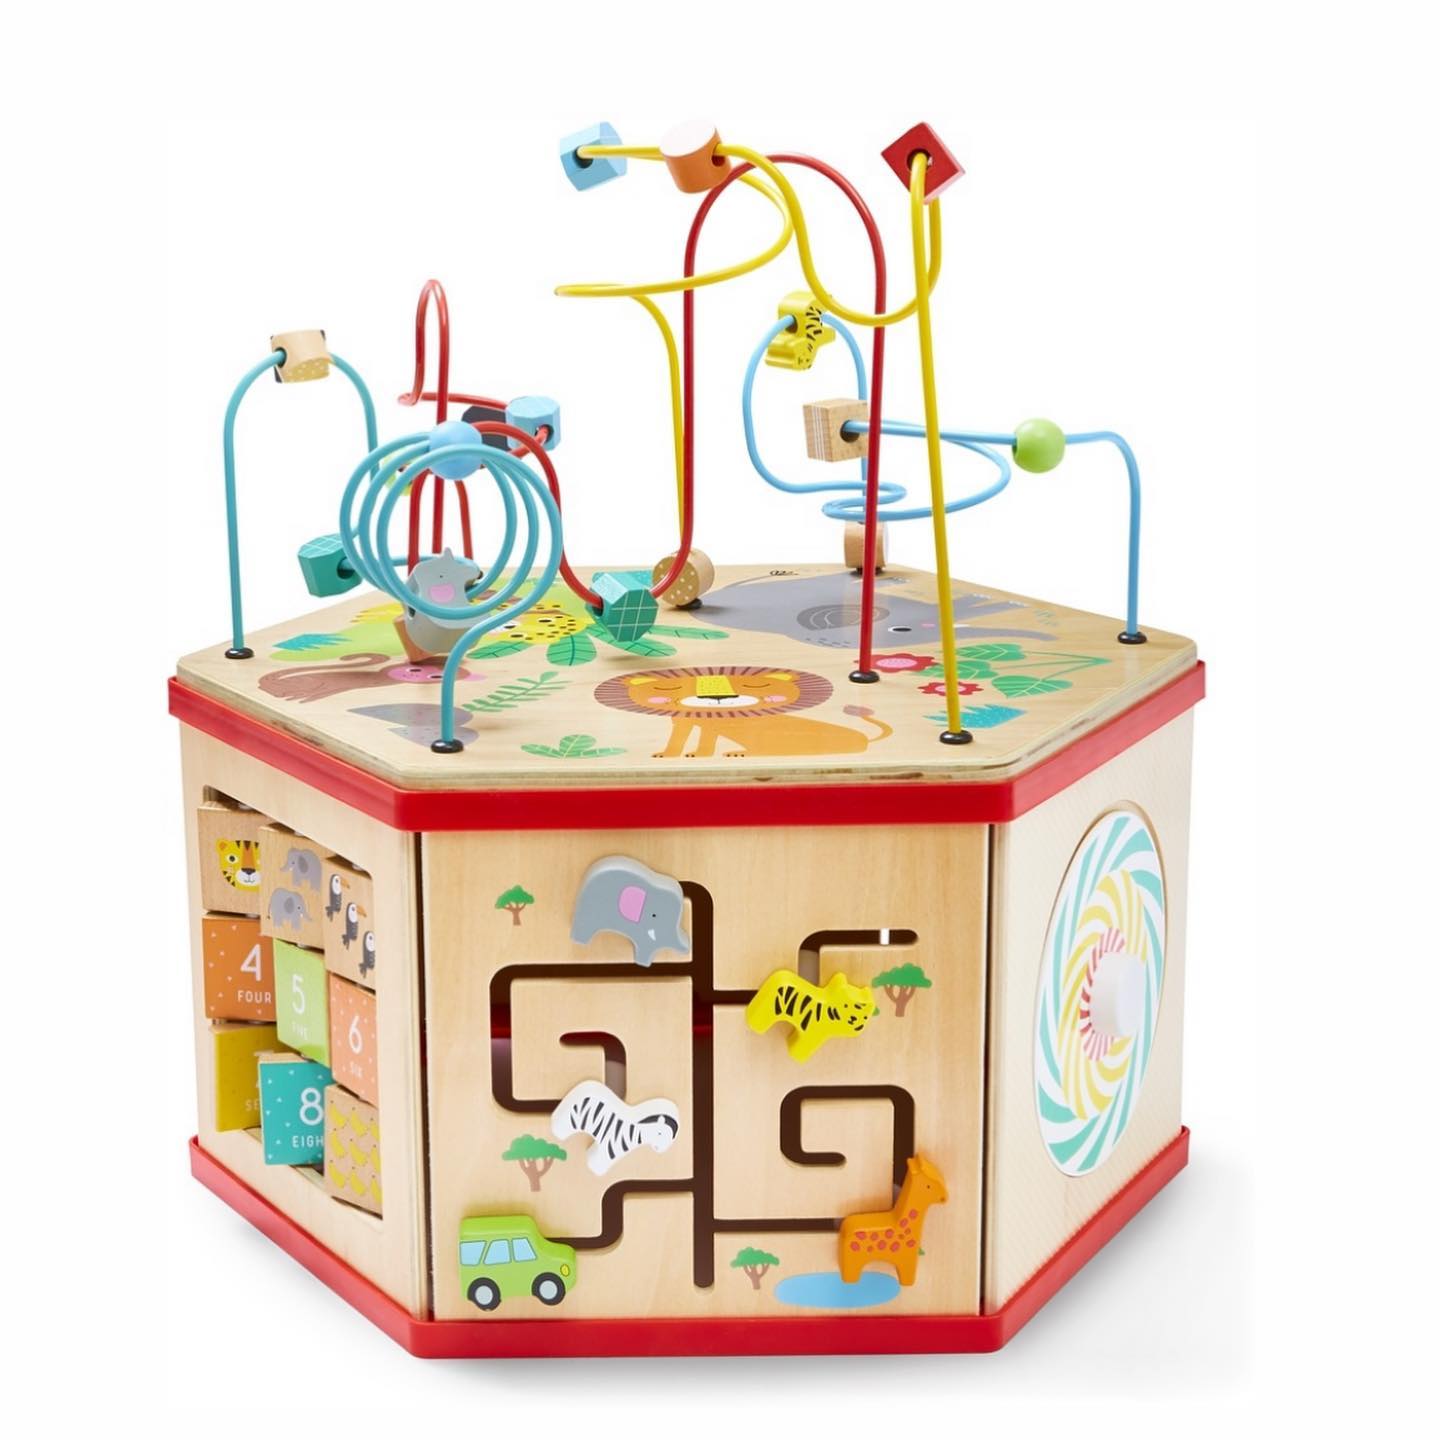 Wooden activity station